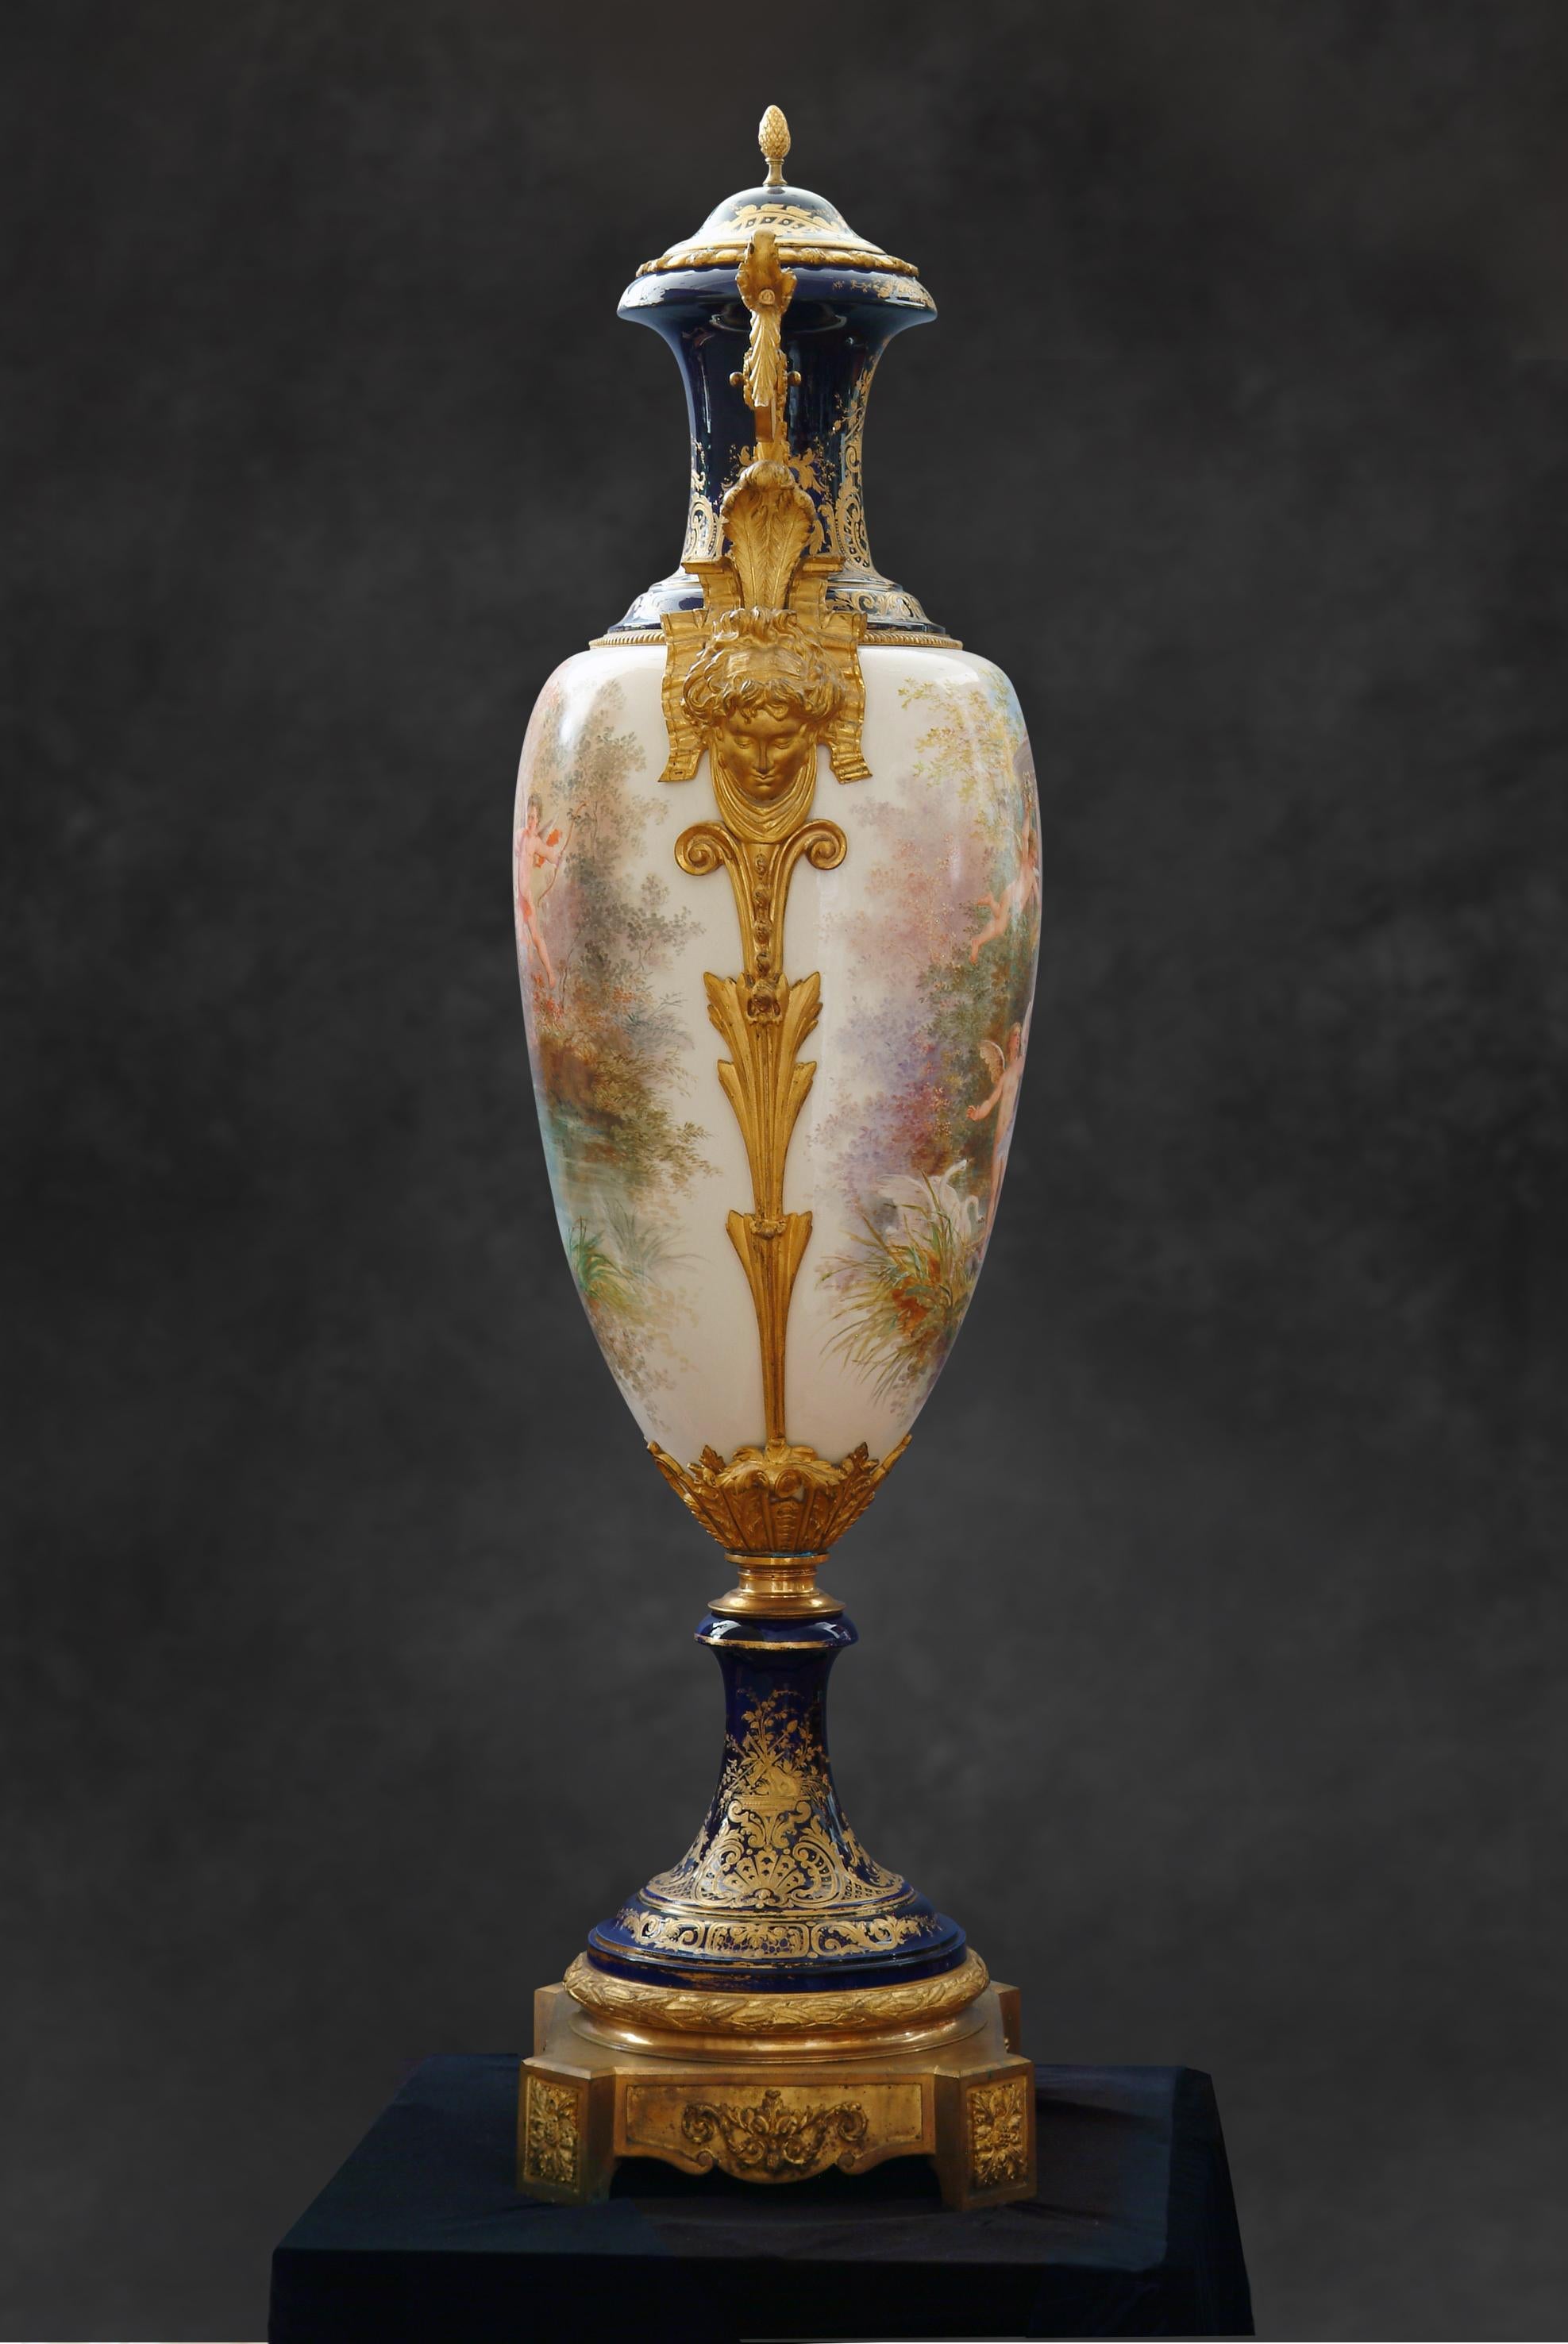 19th Century Monumental 19th century French Sevres Porcelain Covered Urn - 66